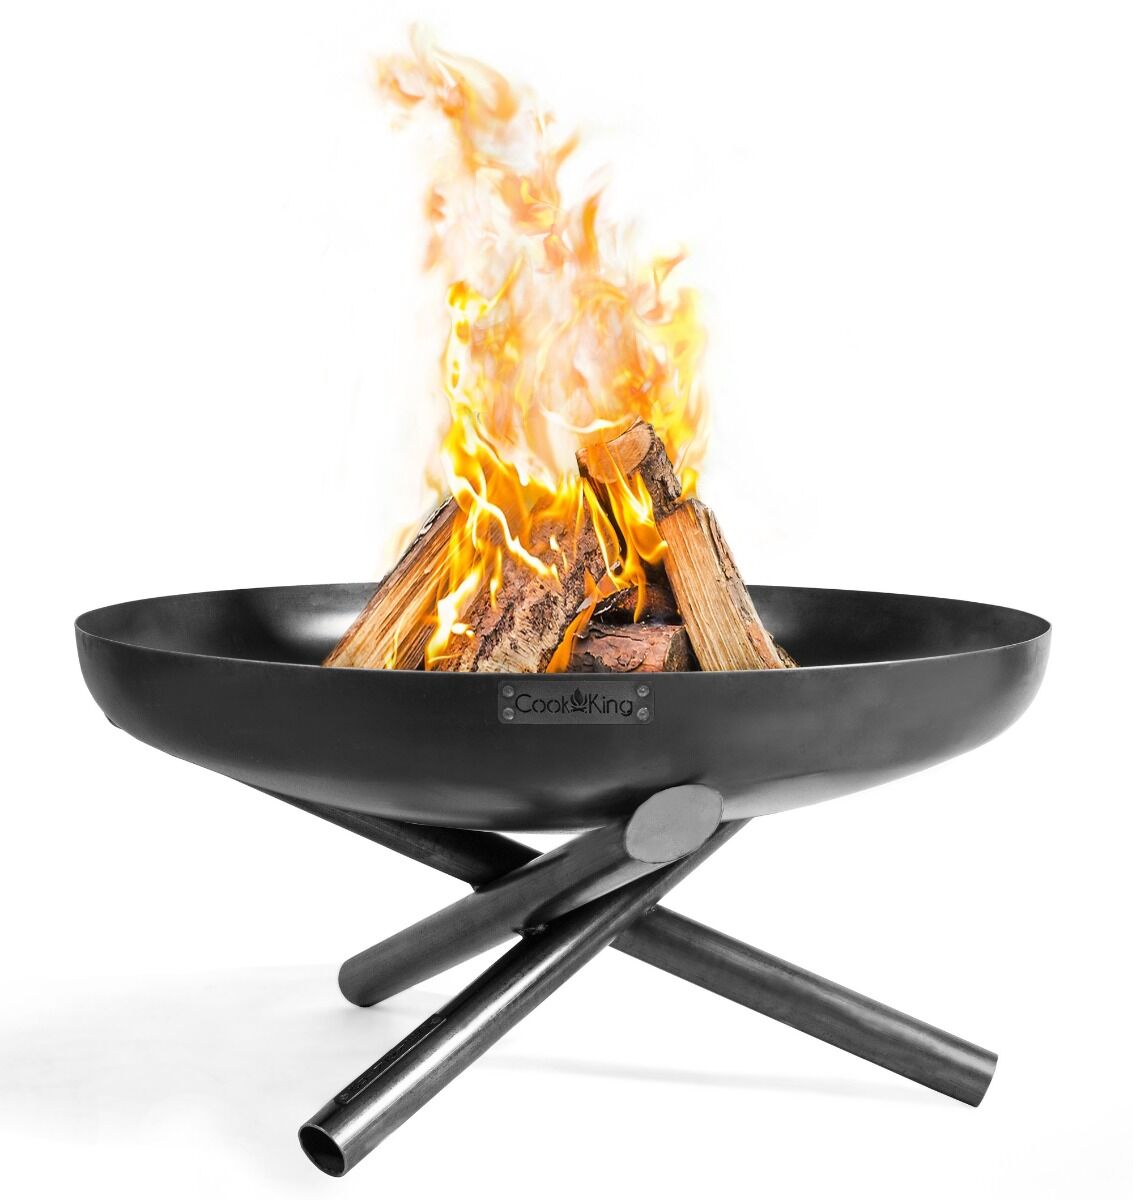 CookKing Fire bowl Indiana